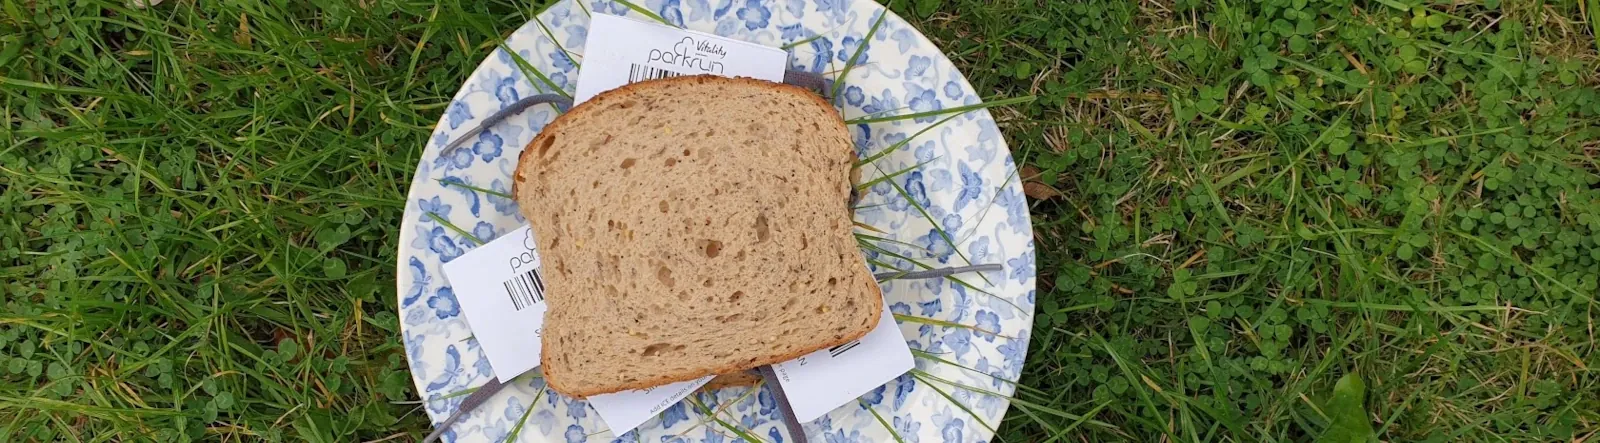 A sandwich on a plate that is filled with parkrun barcodes and grass